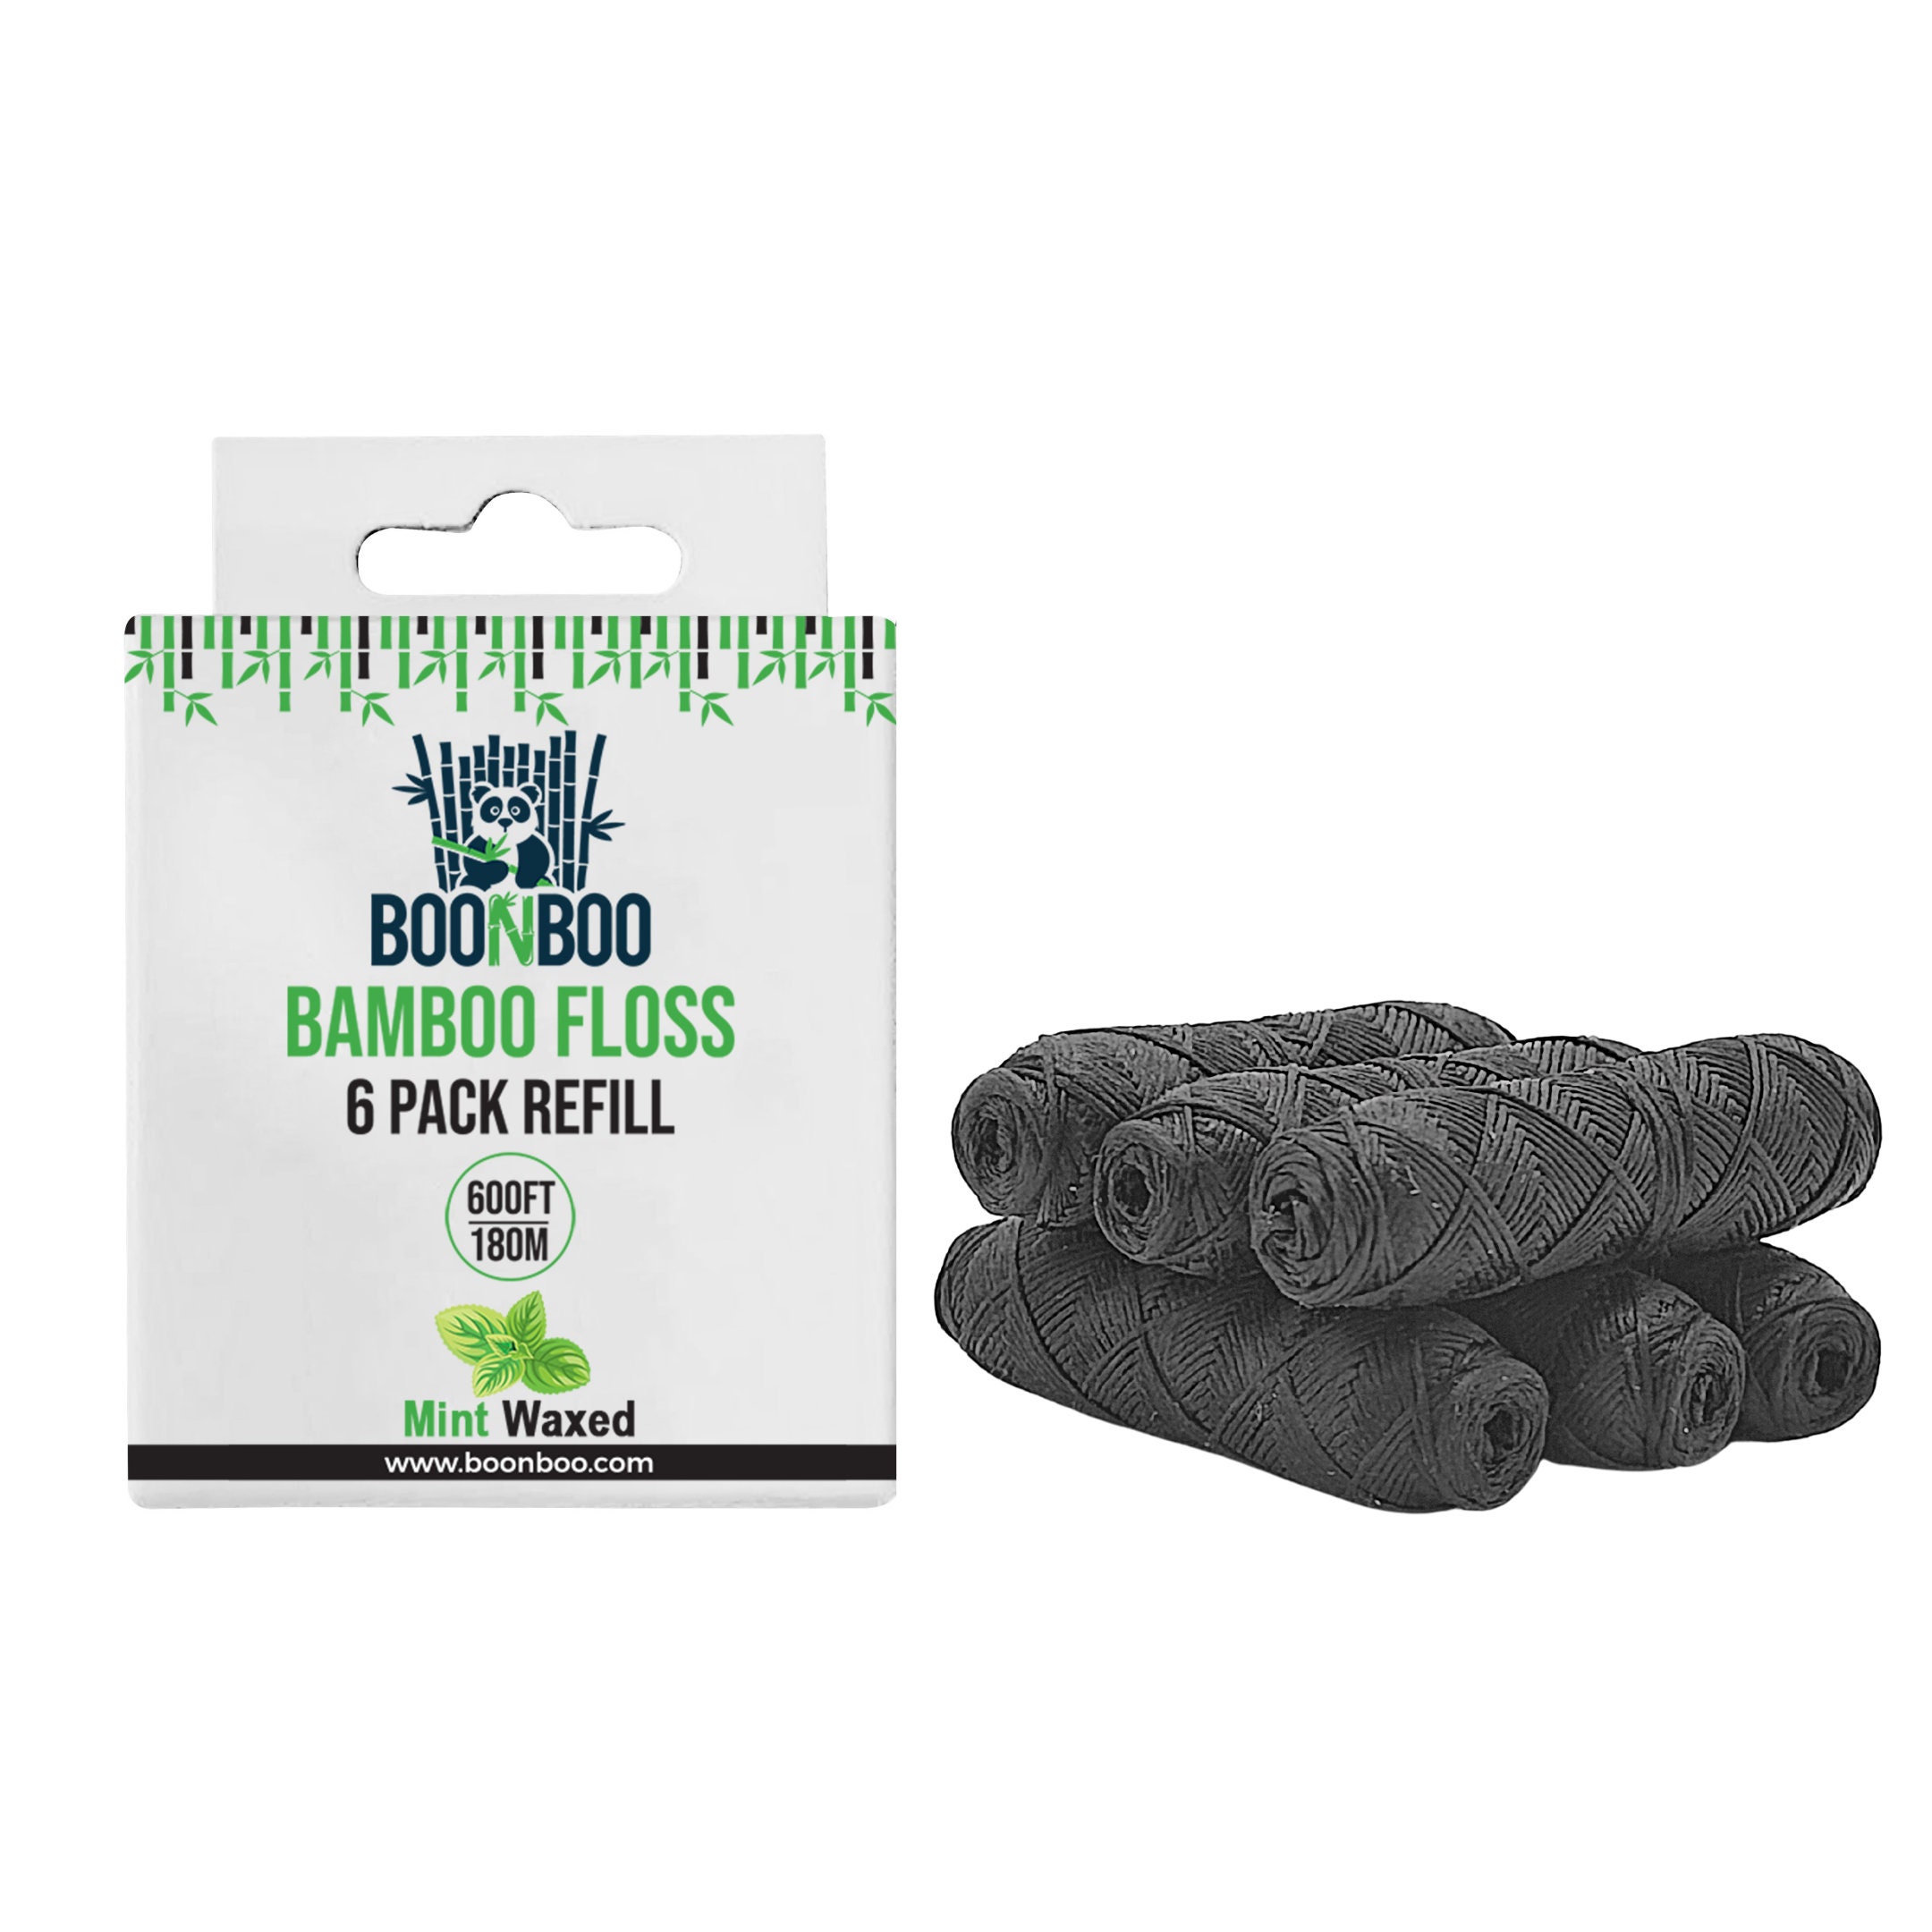 BOONBOO Toilet Paper | 100% Bamboo | Unbleached 4 Rolls | 3-Ply 180 Sheets  | PFAS-FREE | Sustainable & Renewable | Plastic-Free & Tree-Free